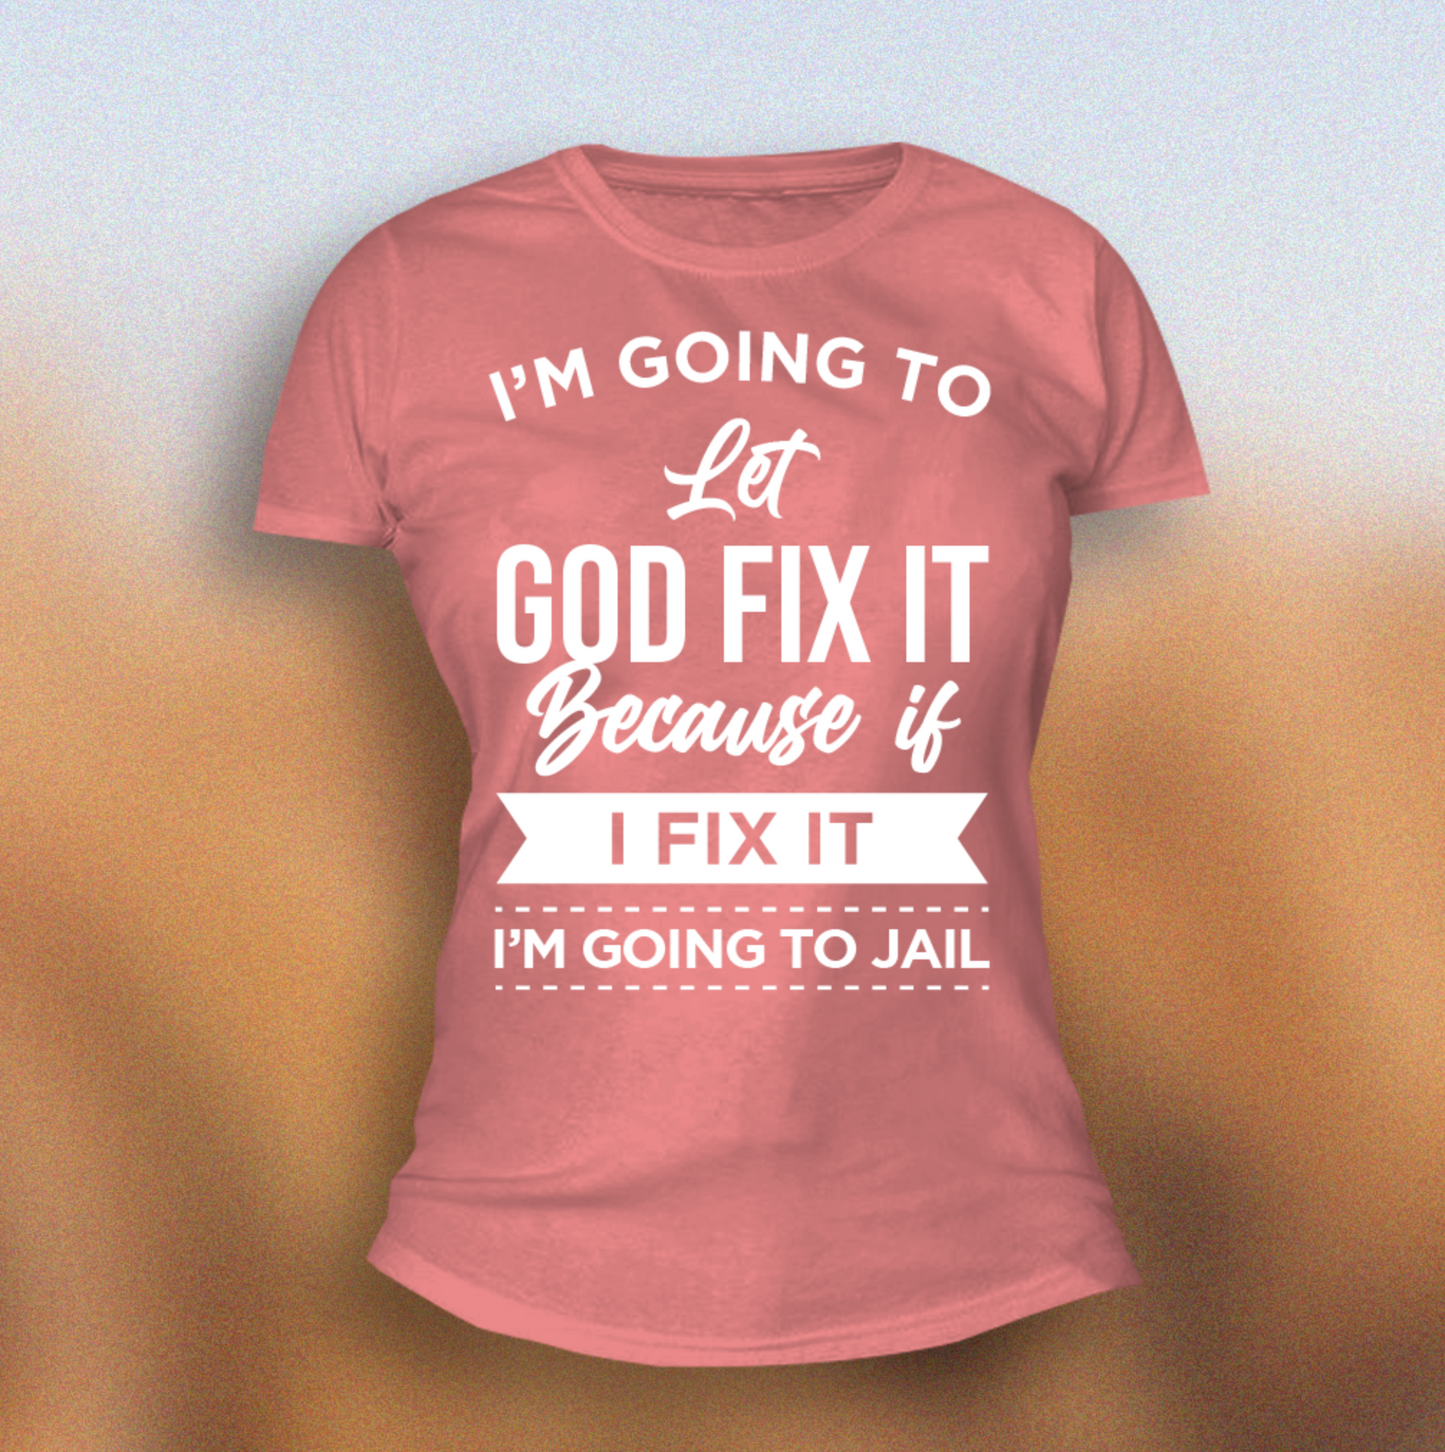 "I'm going to let God fix it..." T-Shirt